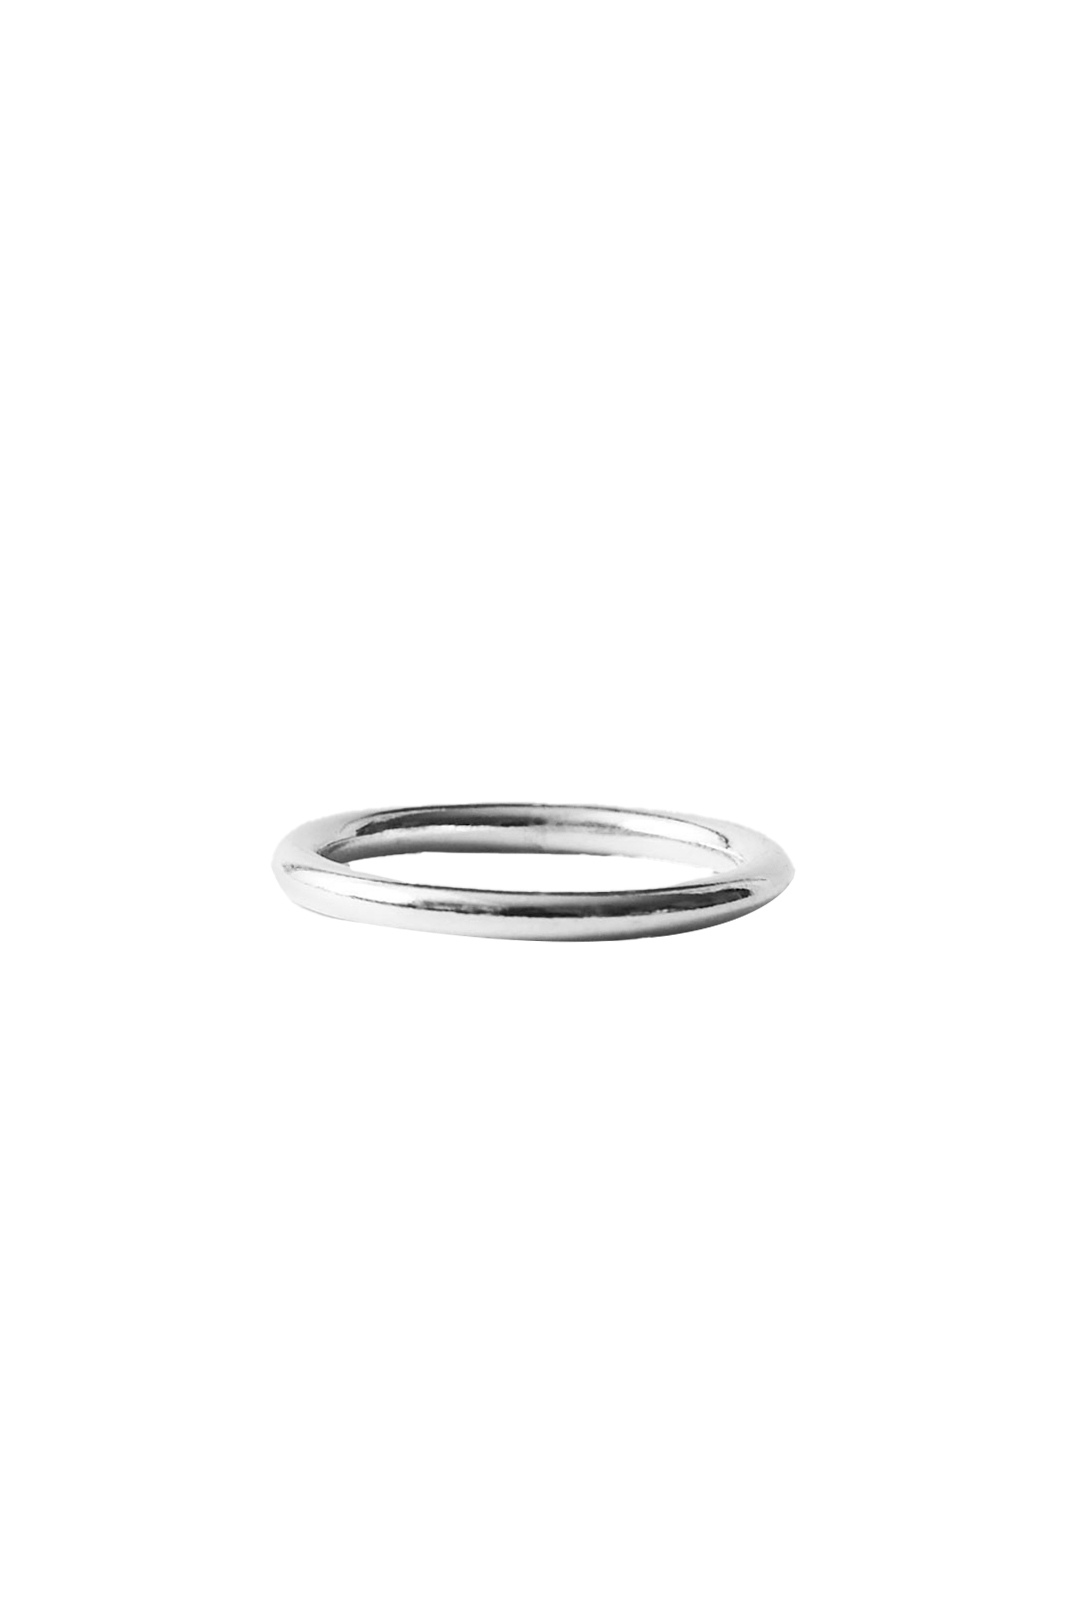 Bliss Silver Band Ring